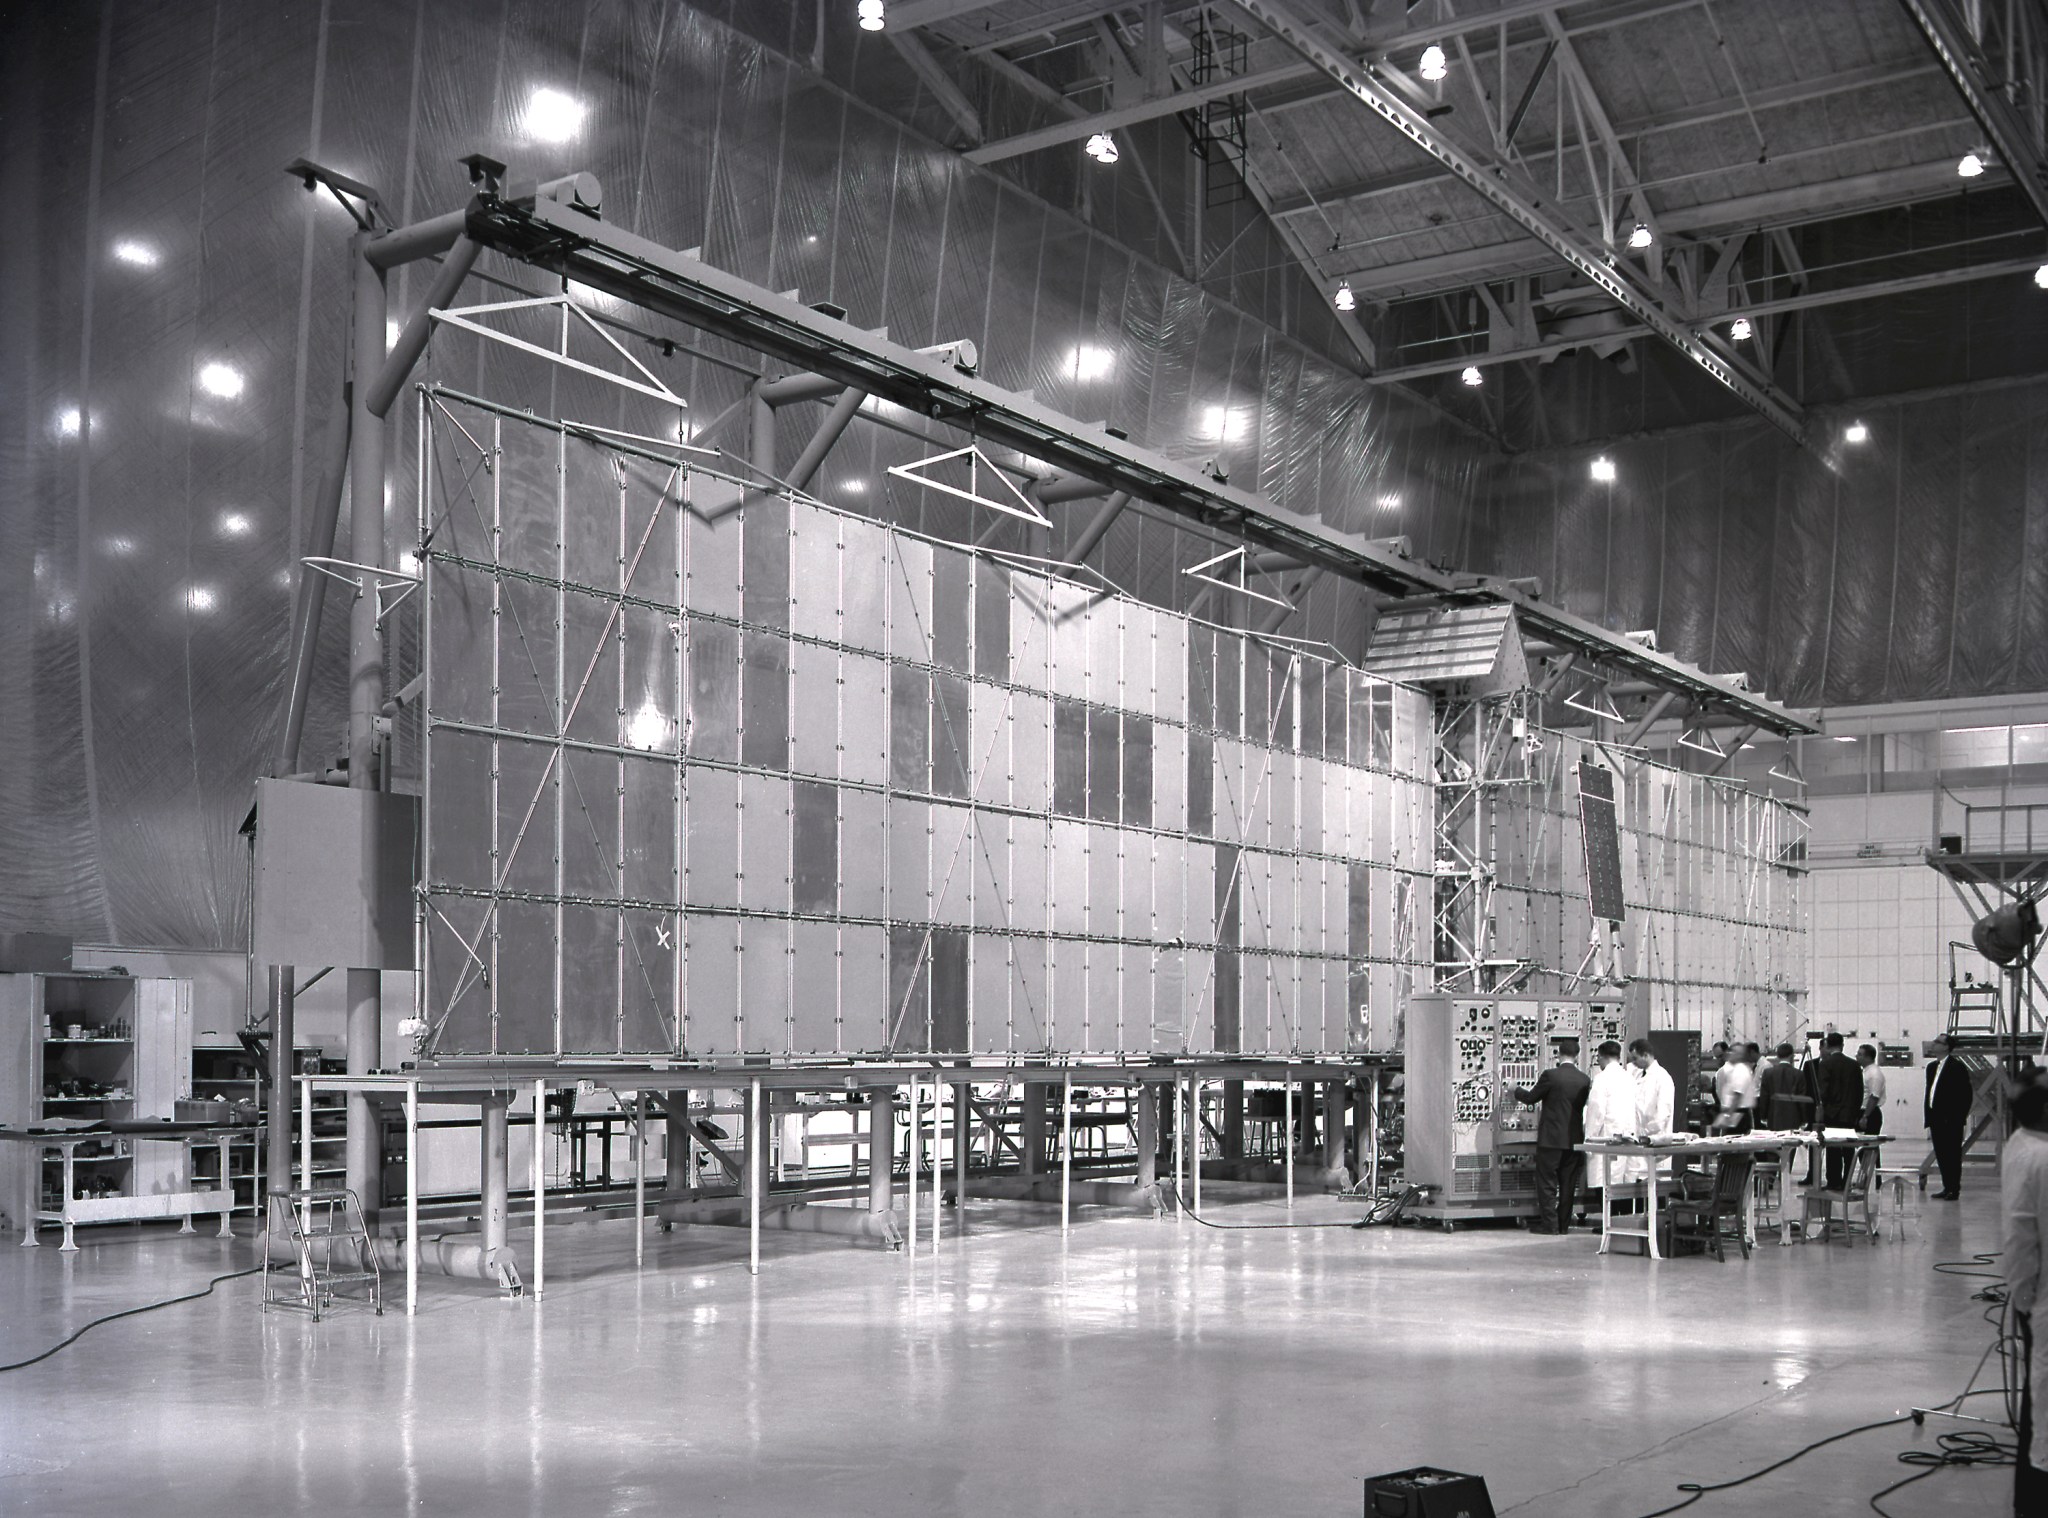 The massive Pegasus satellite is checked out by technicians.